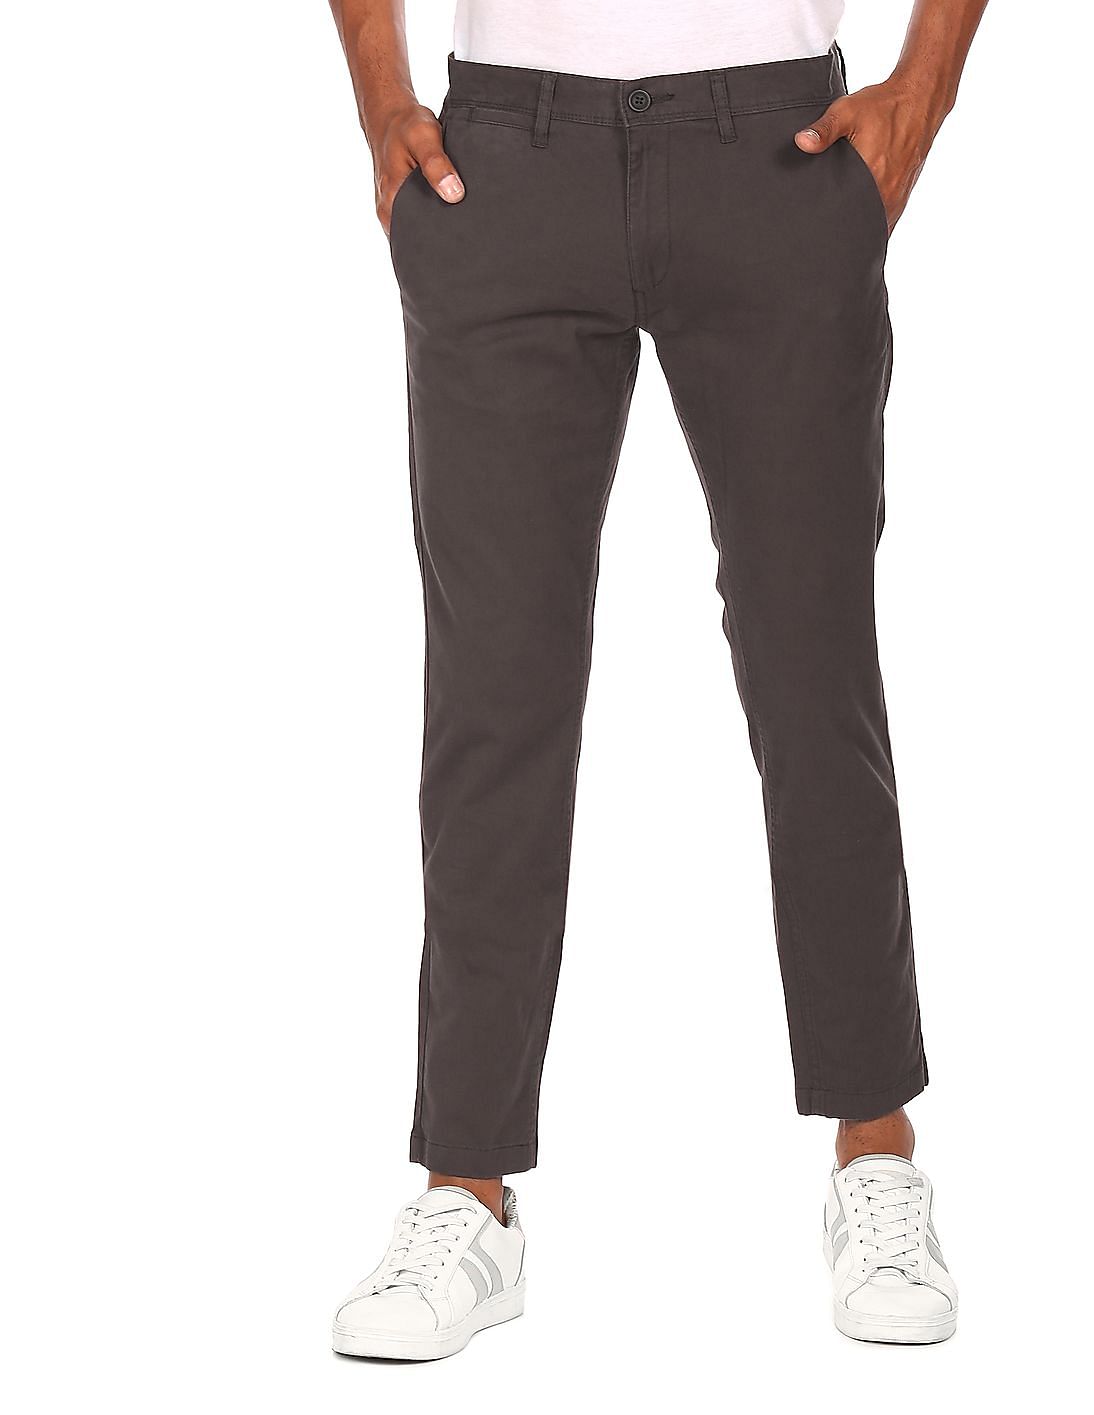 Buy Polo Ralph Lauren Black Casual Trousers Online  491143  The Collective